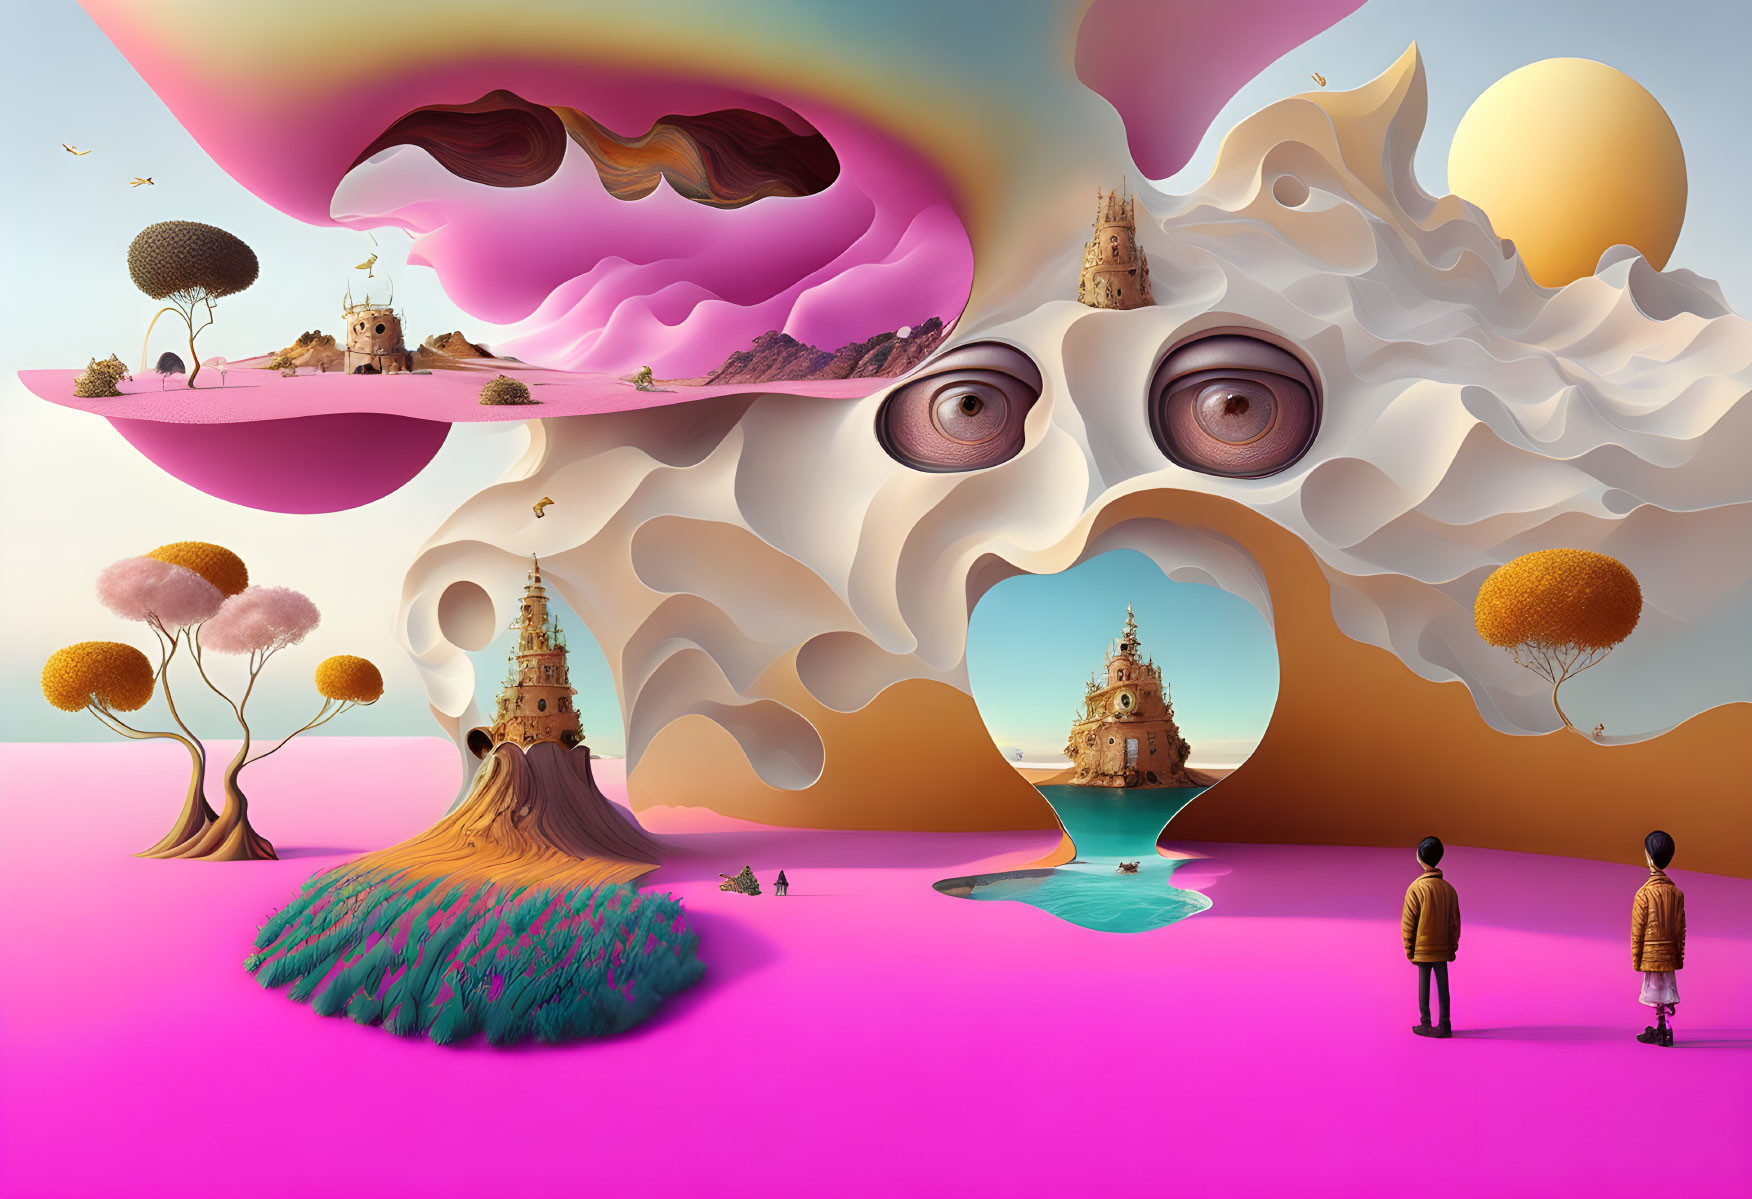 Surreal landscape with face-shaped structure, vibrant trees, castles, and figures under pastel